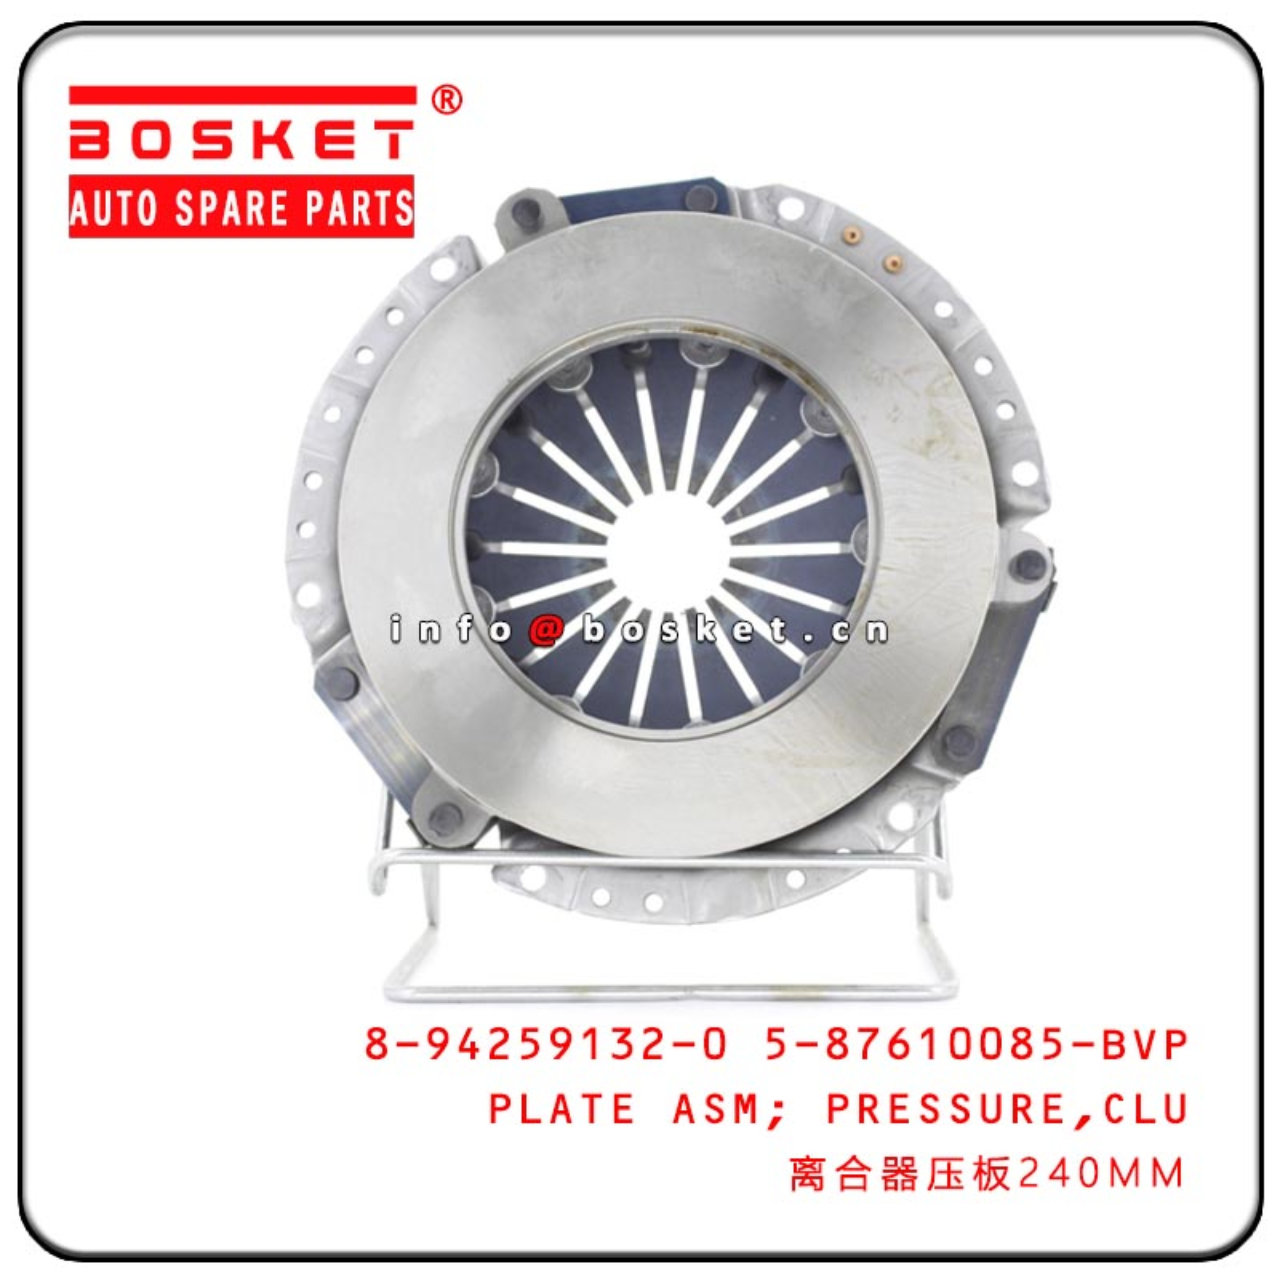 8-94259132-0 5-87610085-BVP 8942591320 587610085BVP Clutch Pressure Plate Assembly  Suitable For ISU